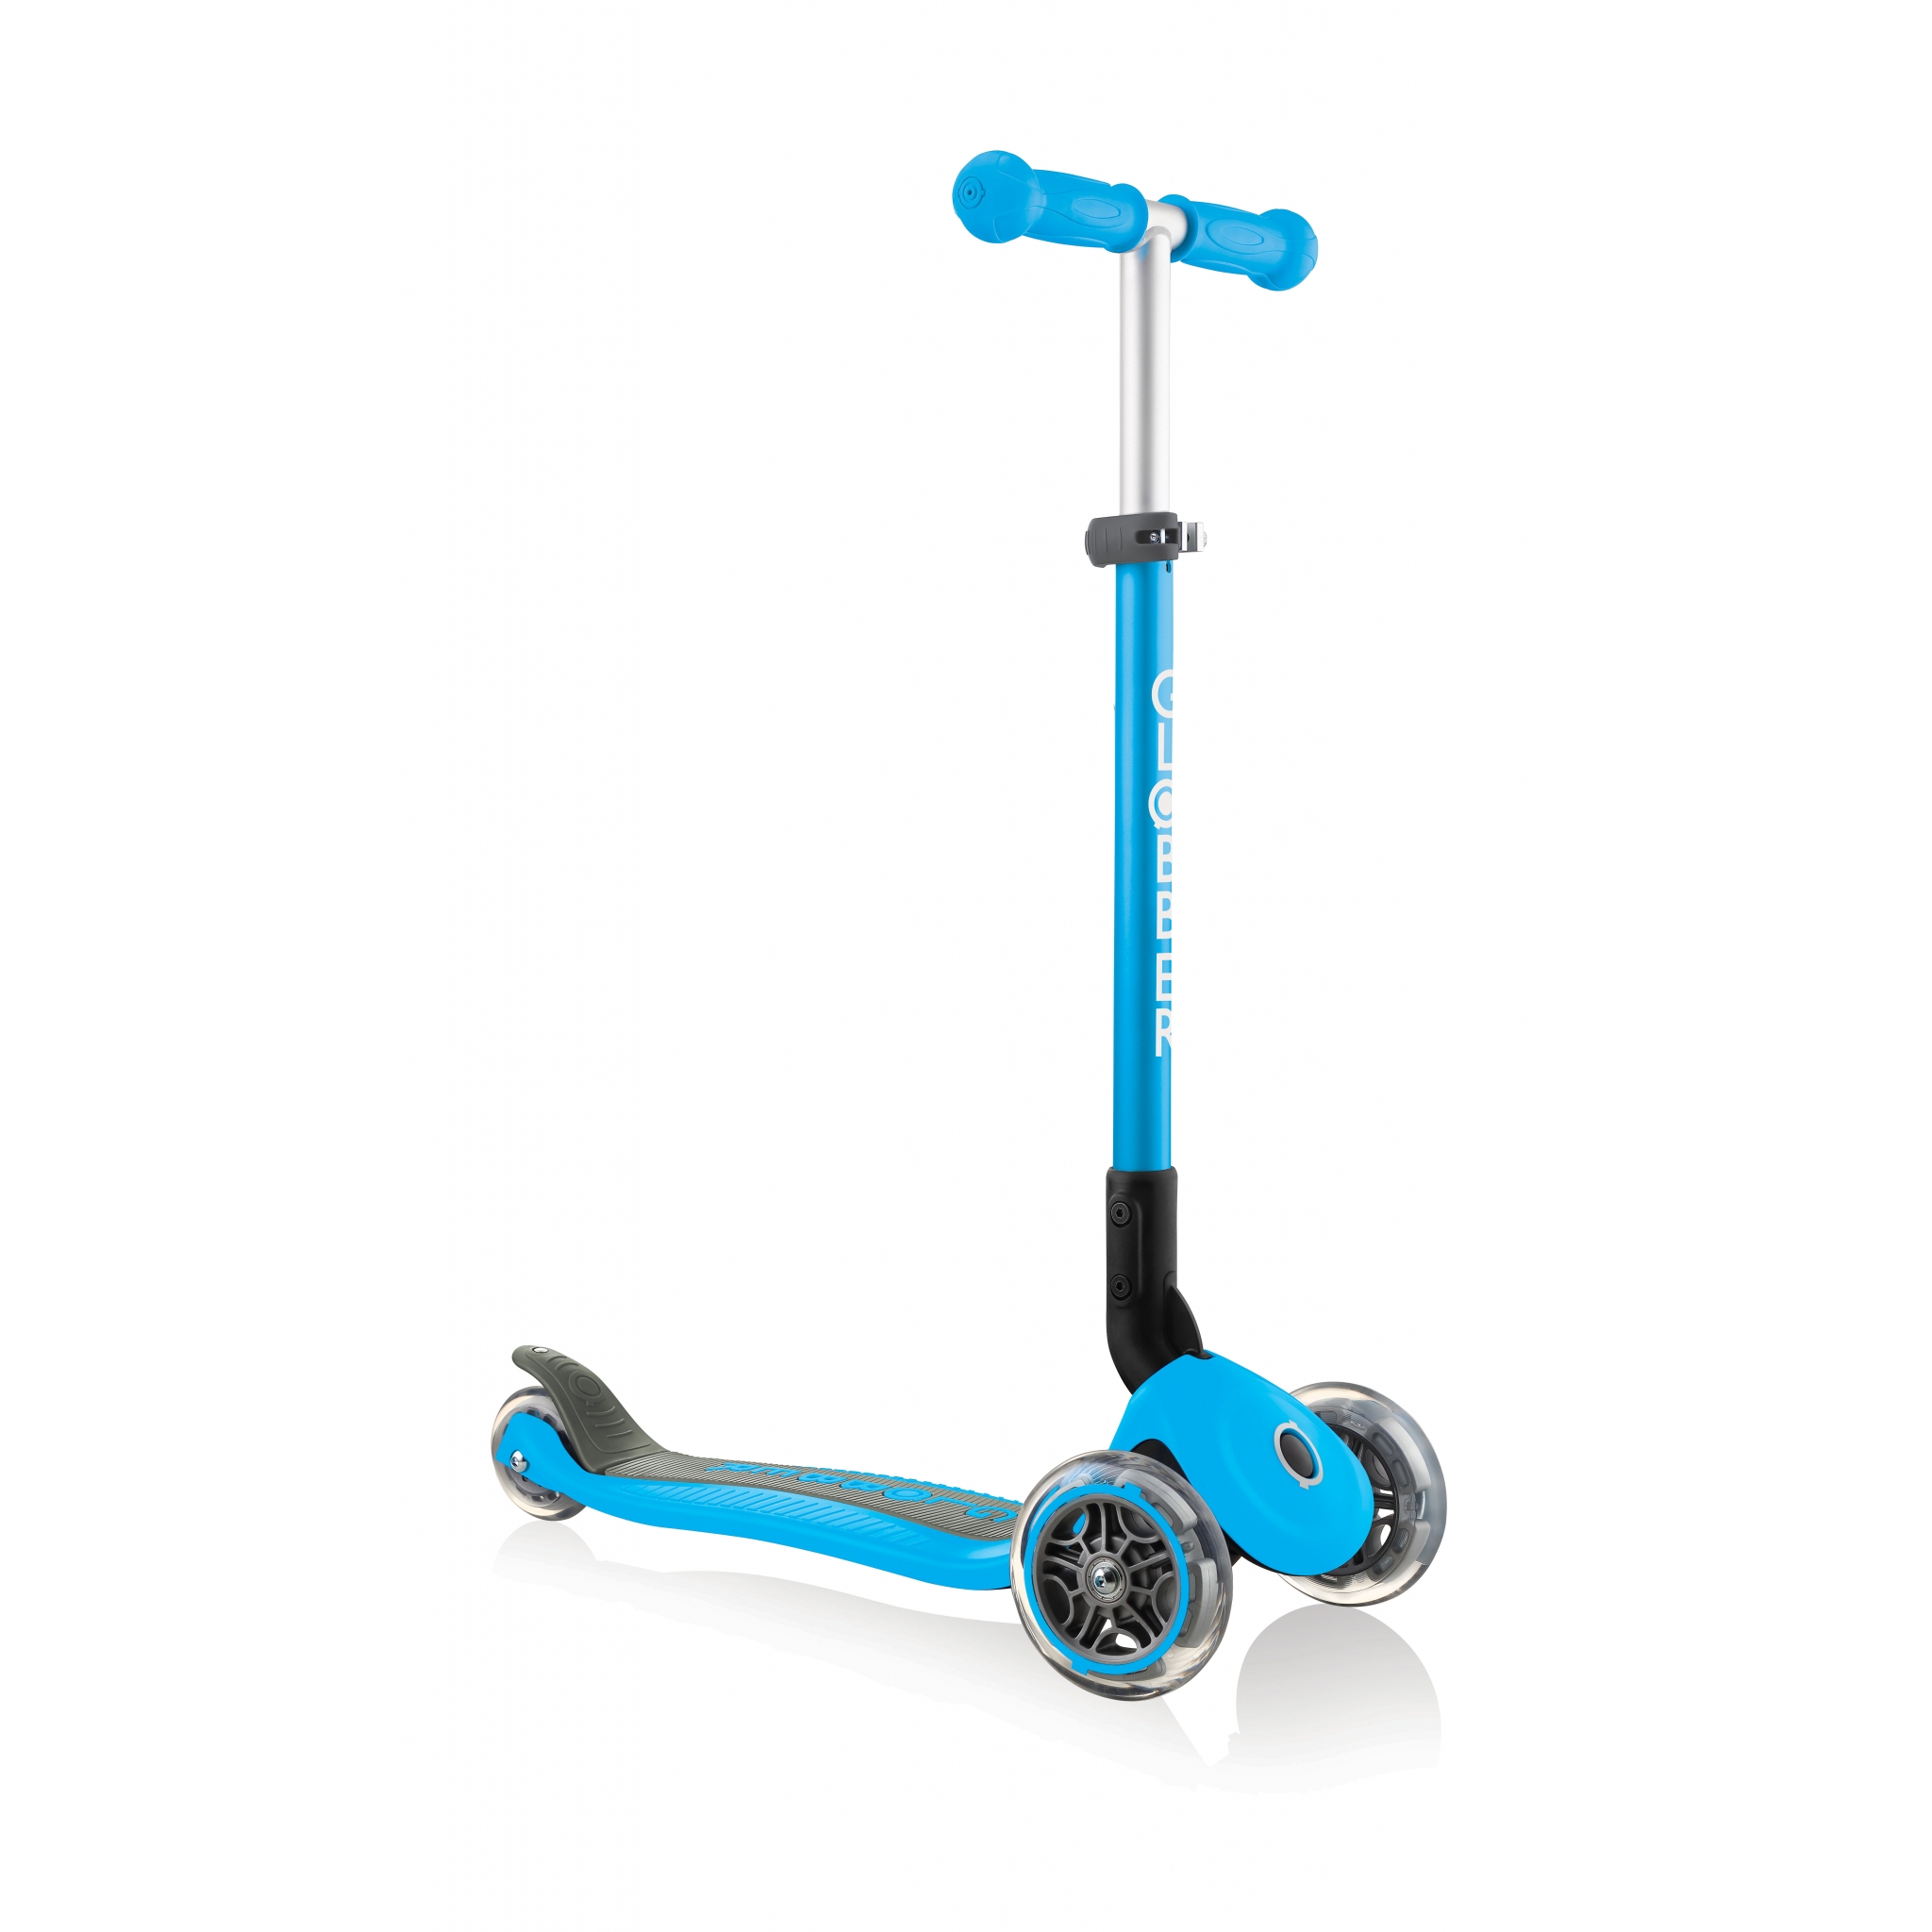 PRIMO-FOLDABLE-3-wheel-foldable-scooter-for-kids-sky-blue 2